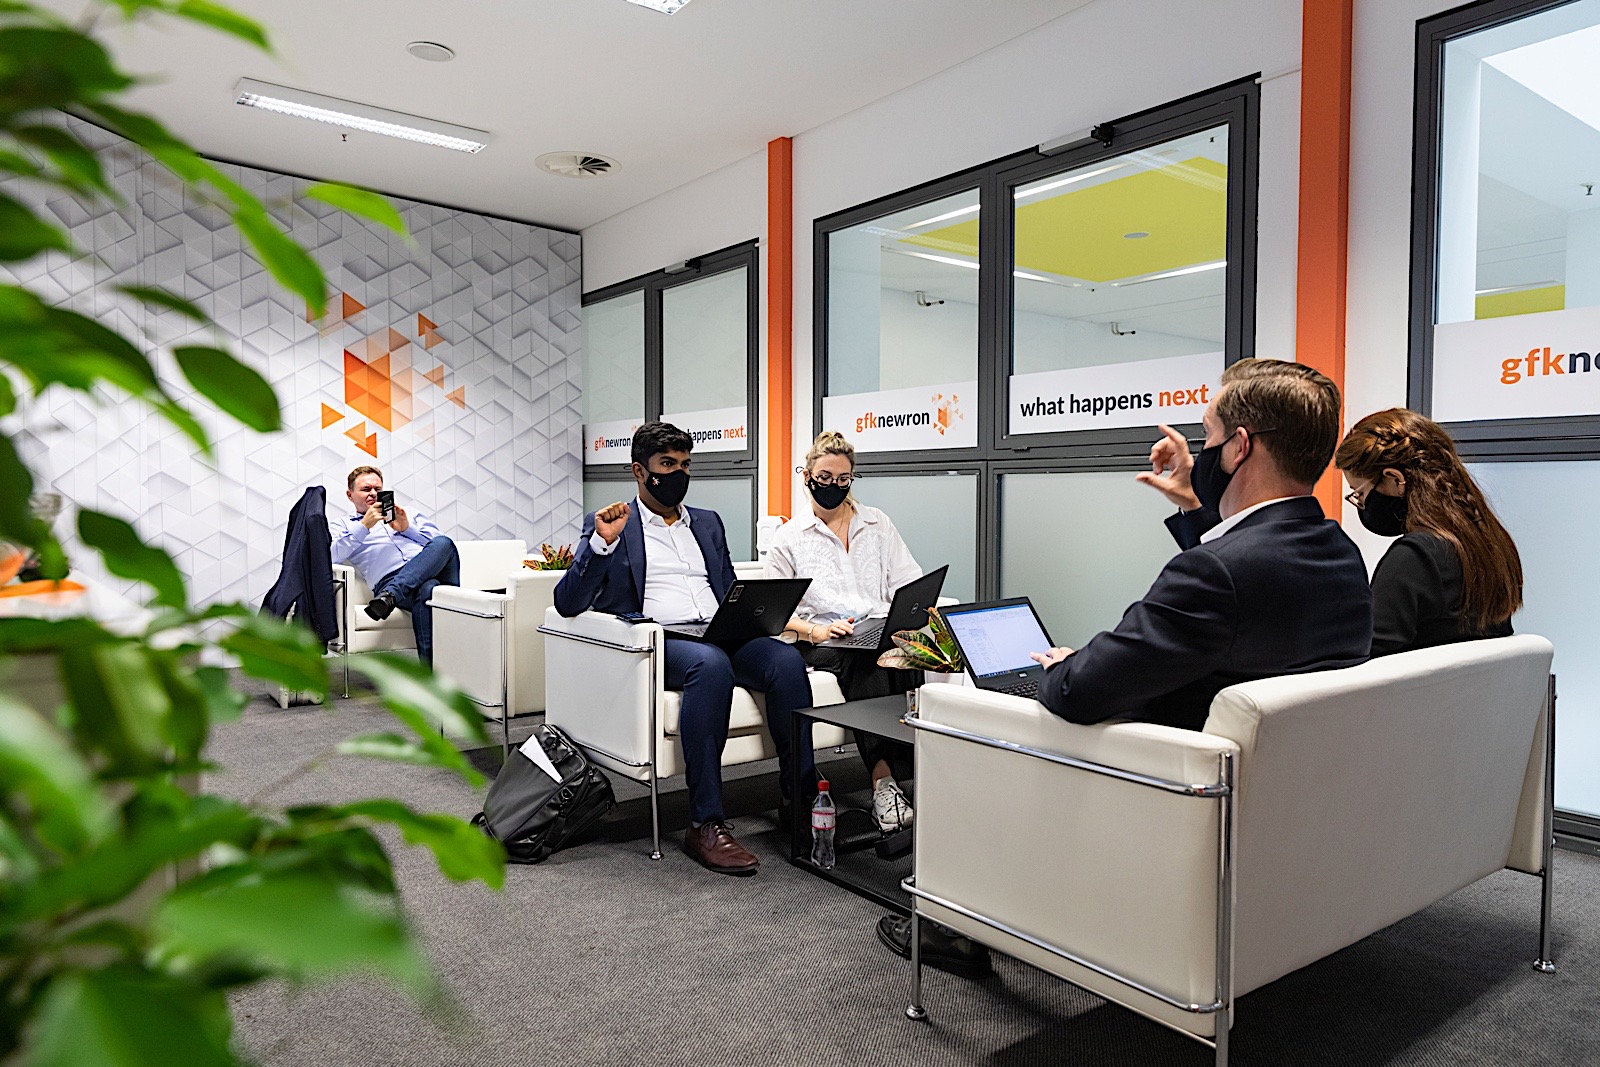 Meetings in the GfK office at IFA 2020